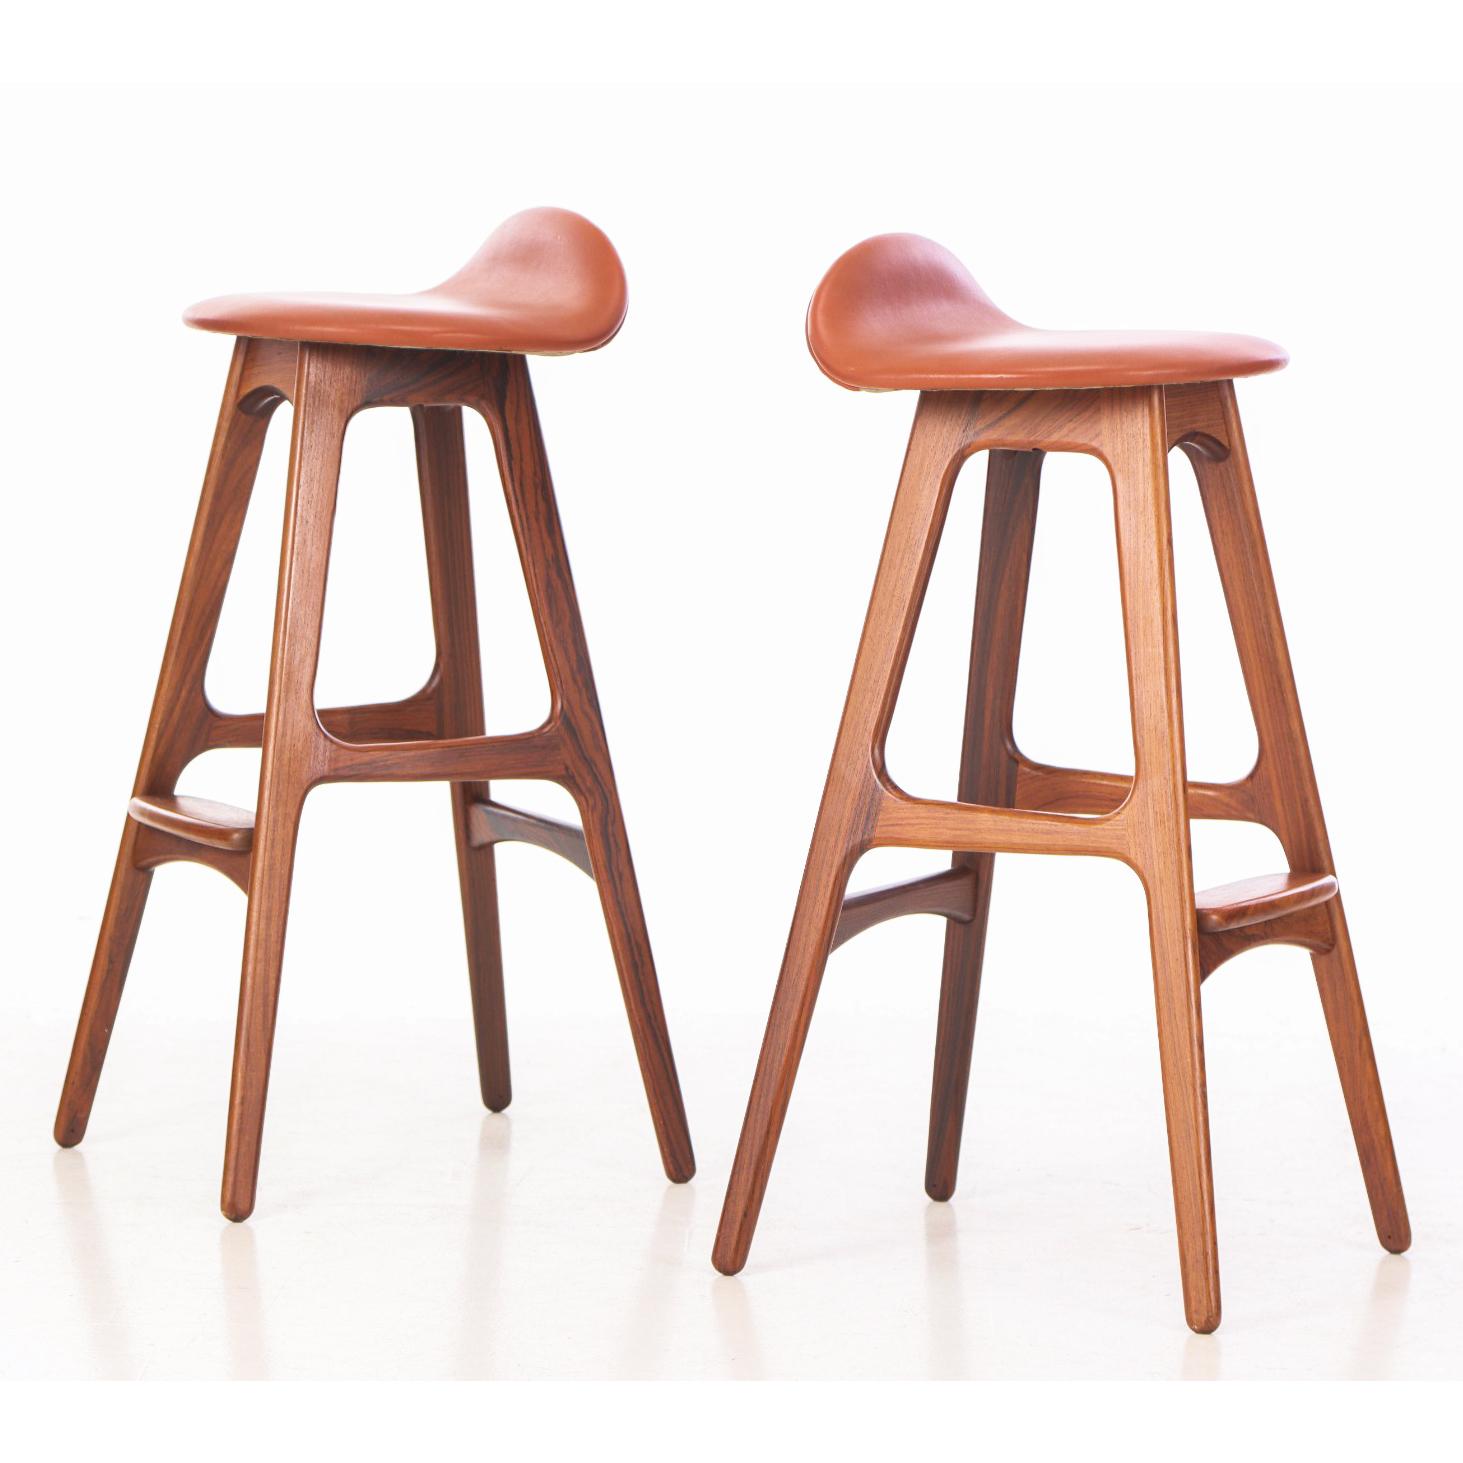 Erik Buch bar stools model OD-61
Produced by Odense møbelfabrik in Denmark
Rosewood and conhaque leather
Original condition.

All pieces of furniture can be professionally restored to their vintage condition. The piece is restored upon purchase so